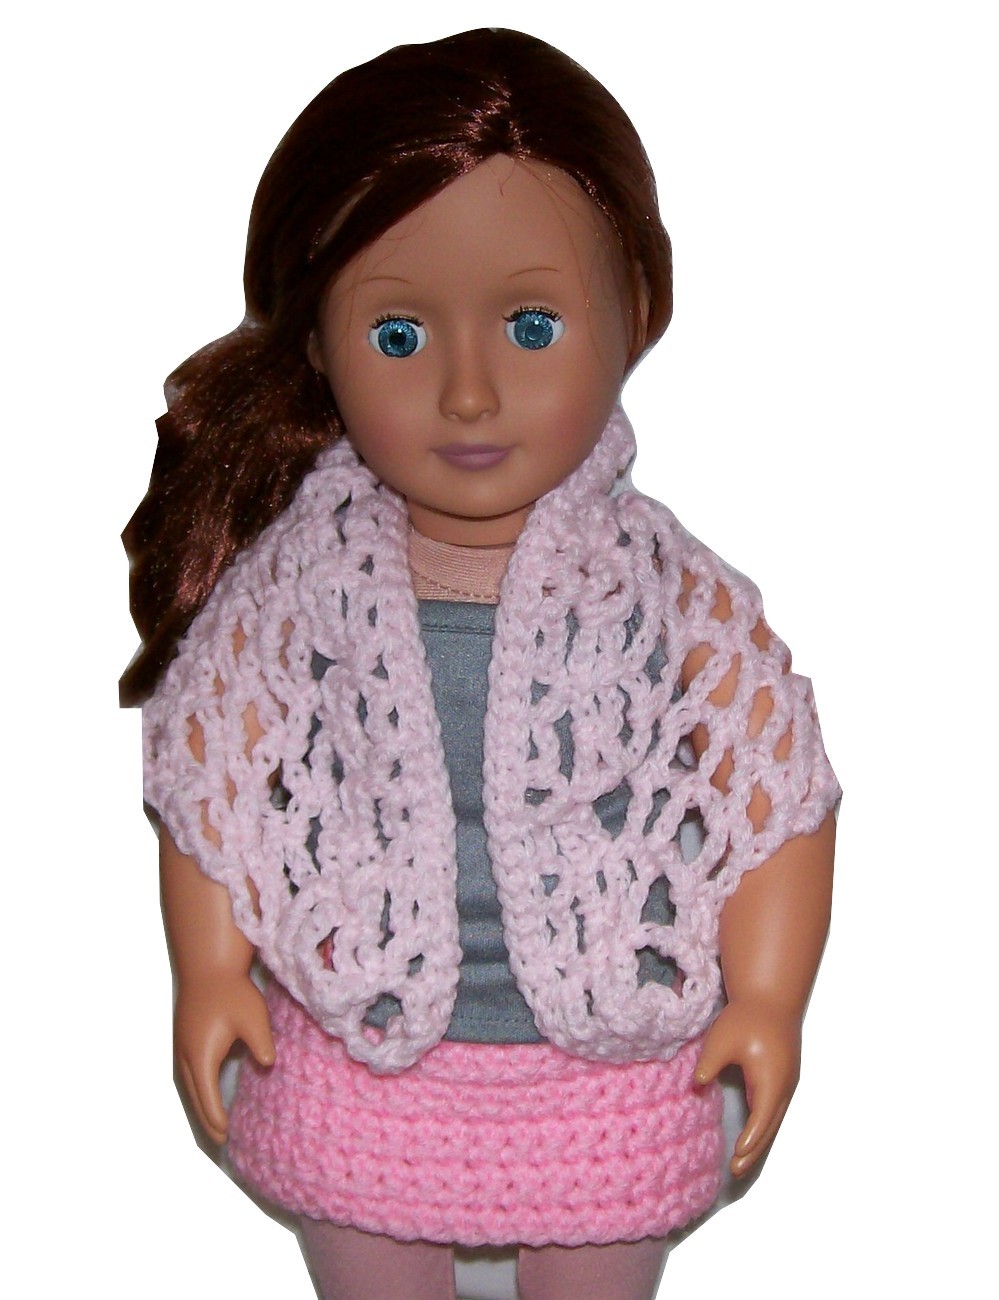 Primary image for Handmade American Girl Pink Shawl, Crochet, 18 Inch Doll